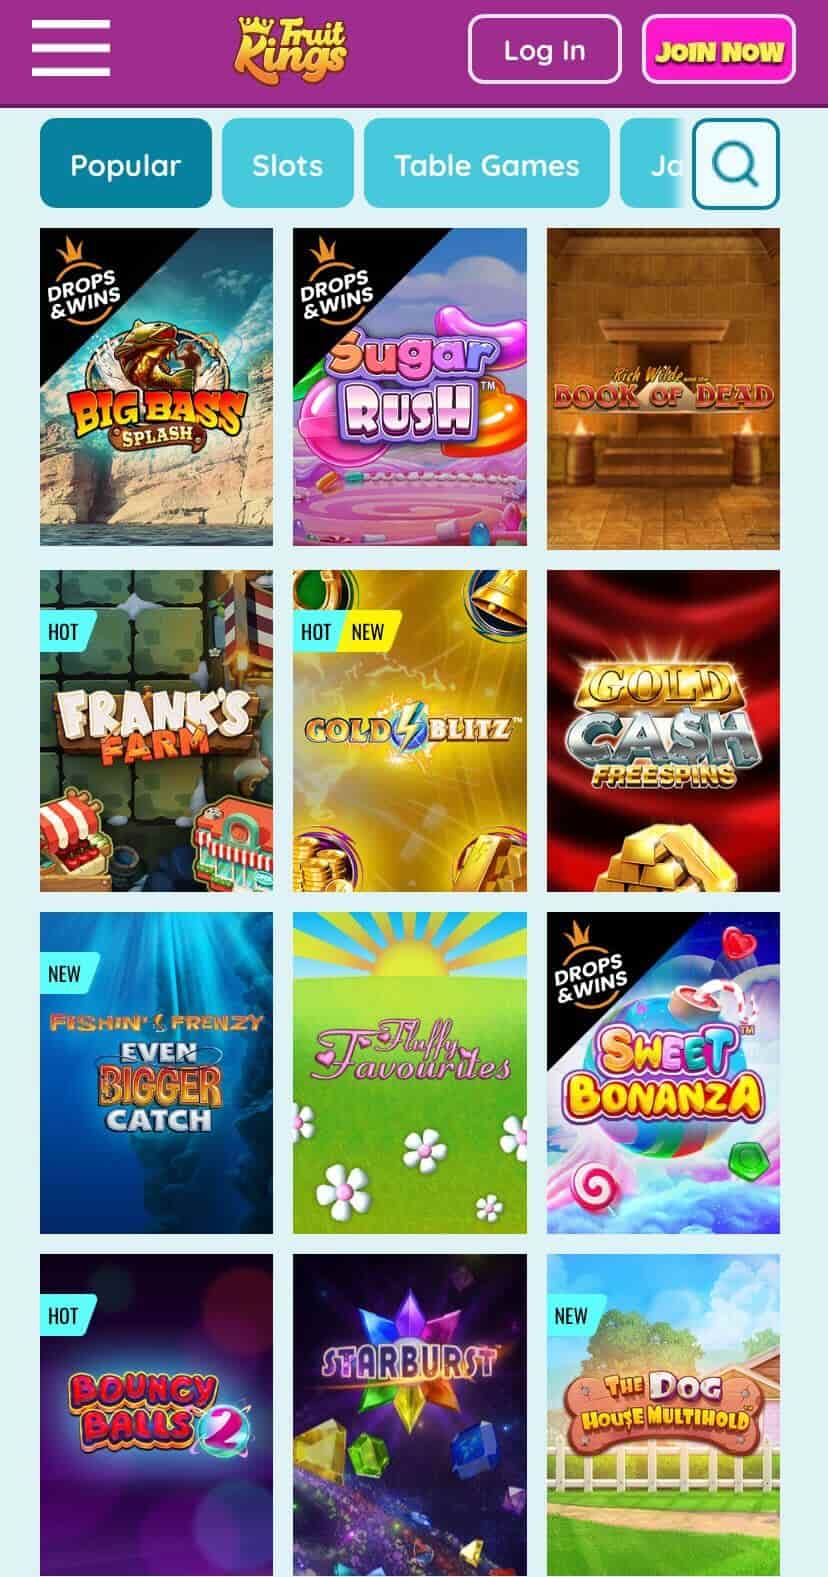 FruitKings Casino Games